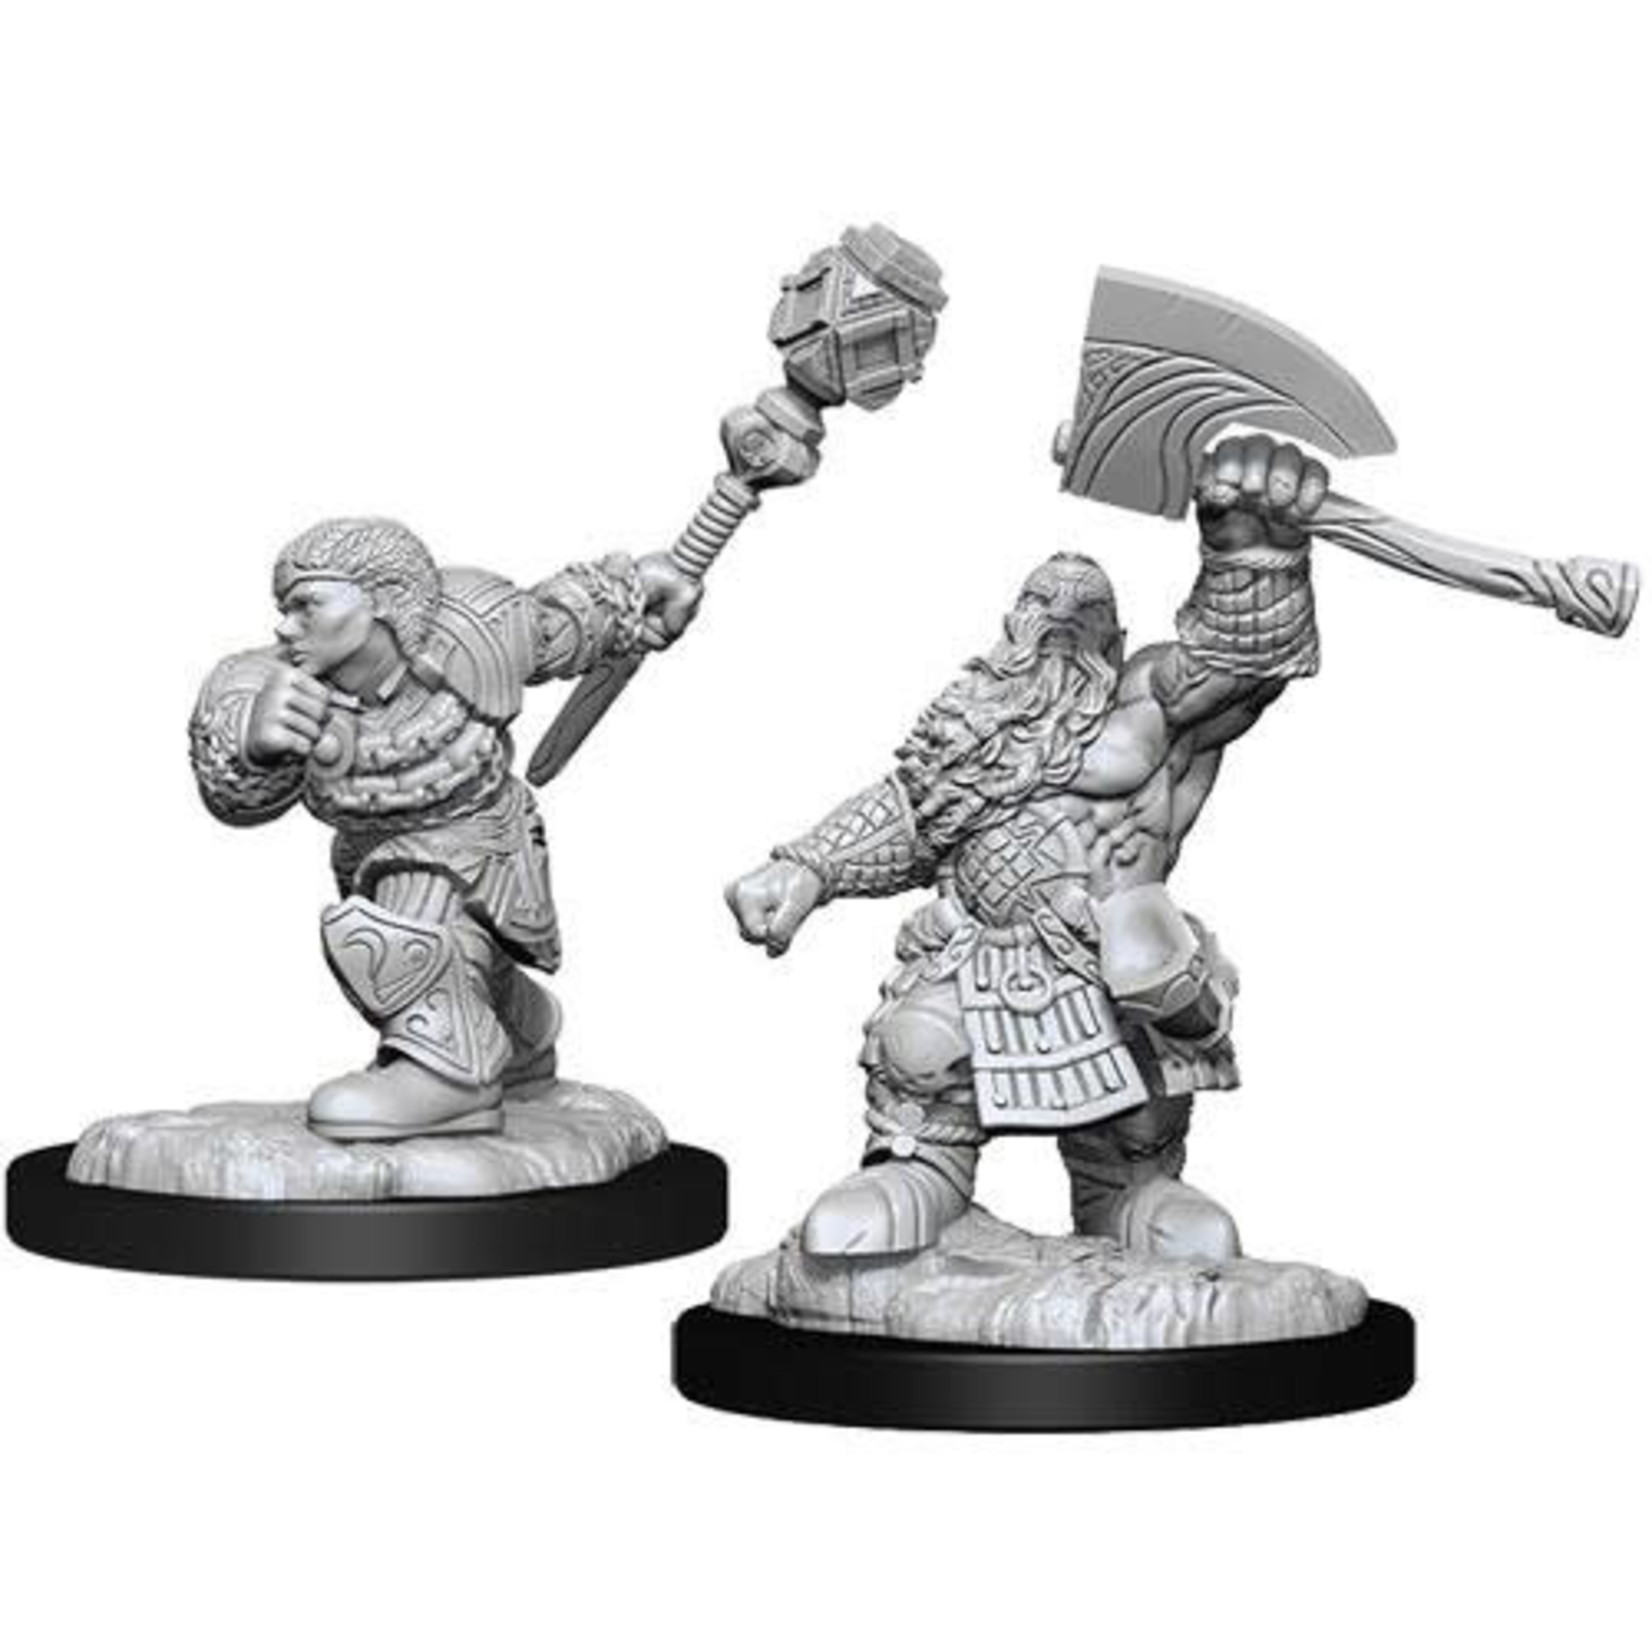 Wizards of the Coast Magic the Gathering Miniatures Dwarf Fighter & Cleric